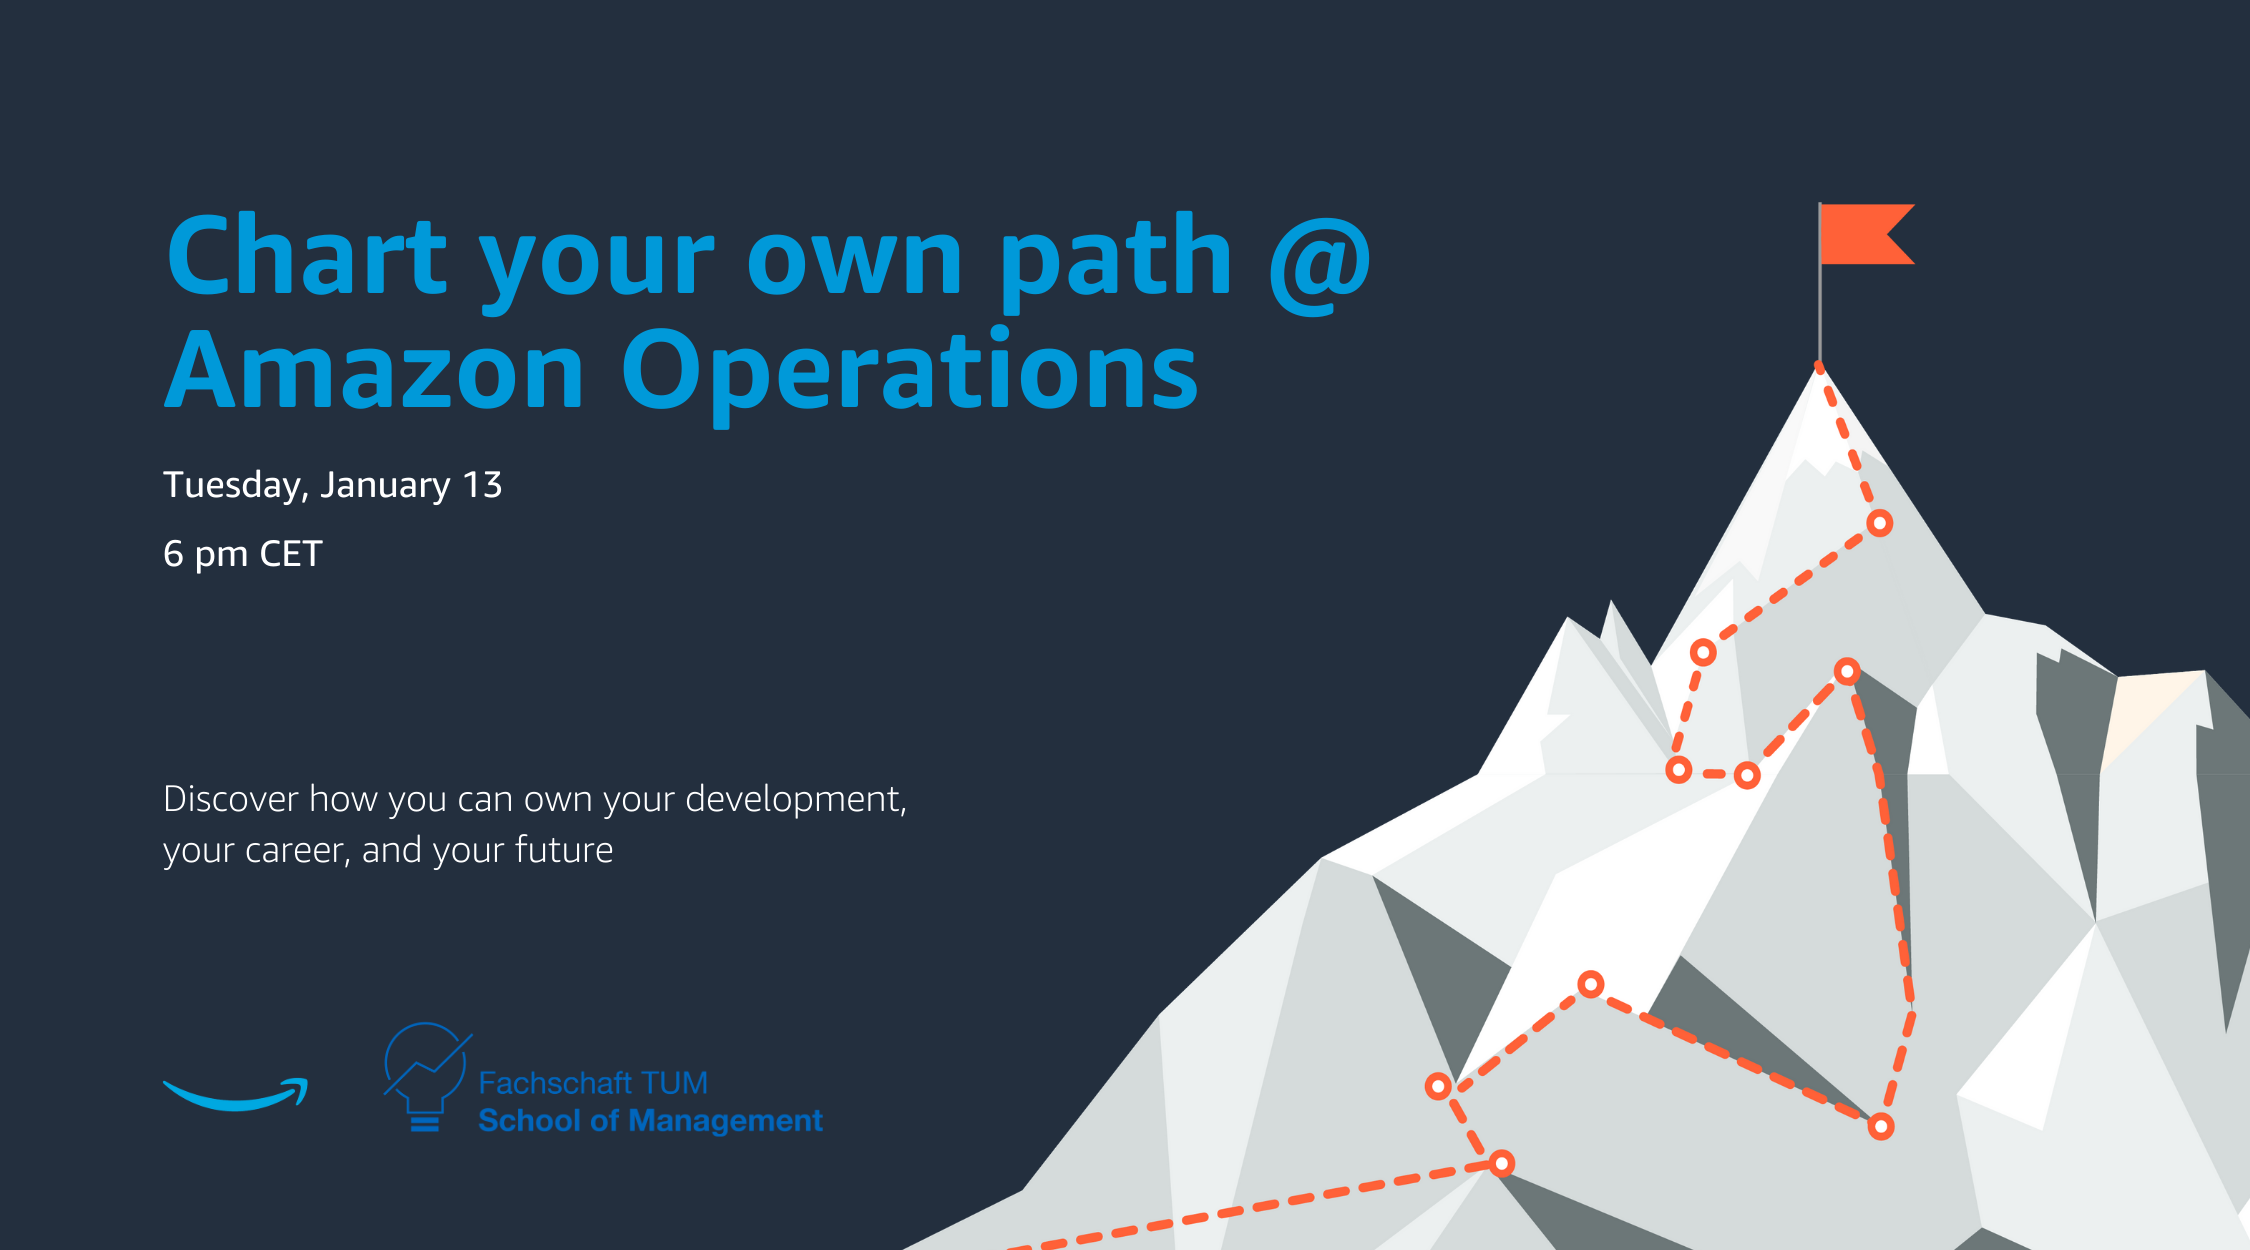 Chart your own path @ Amazon Operations and TUM SOM